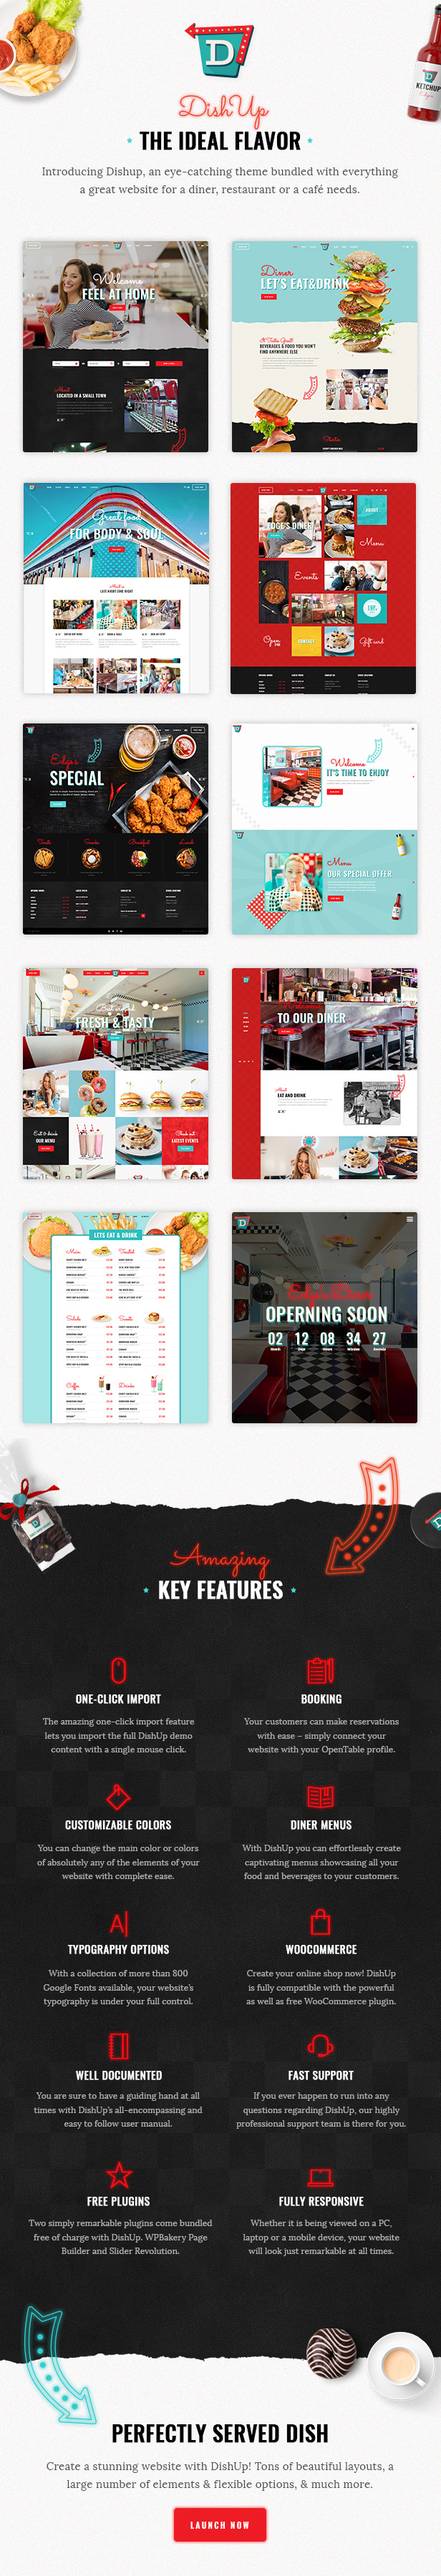 A selection of beautiful images of WordPress pages on a restaurant theme.